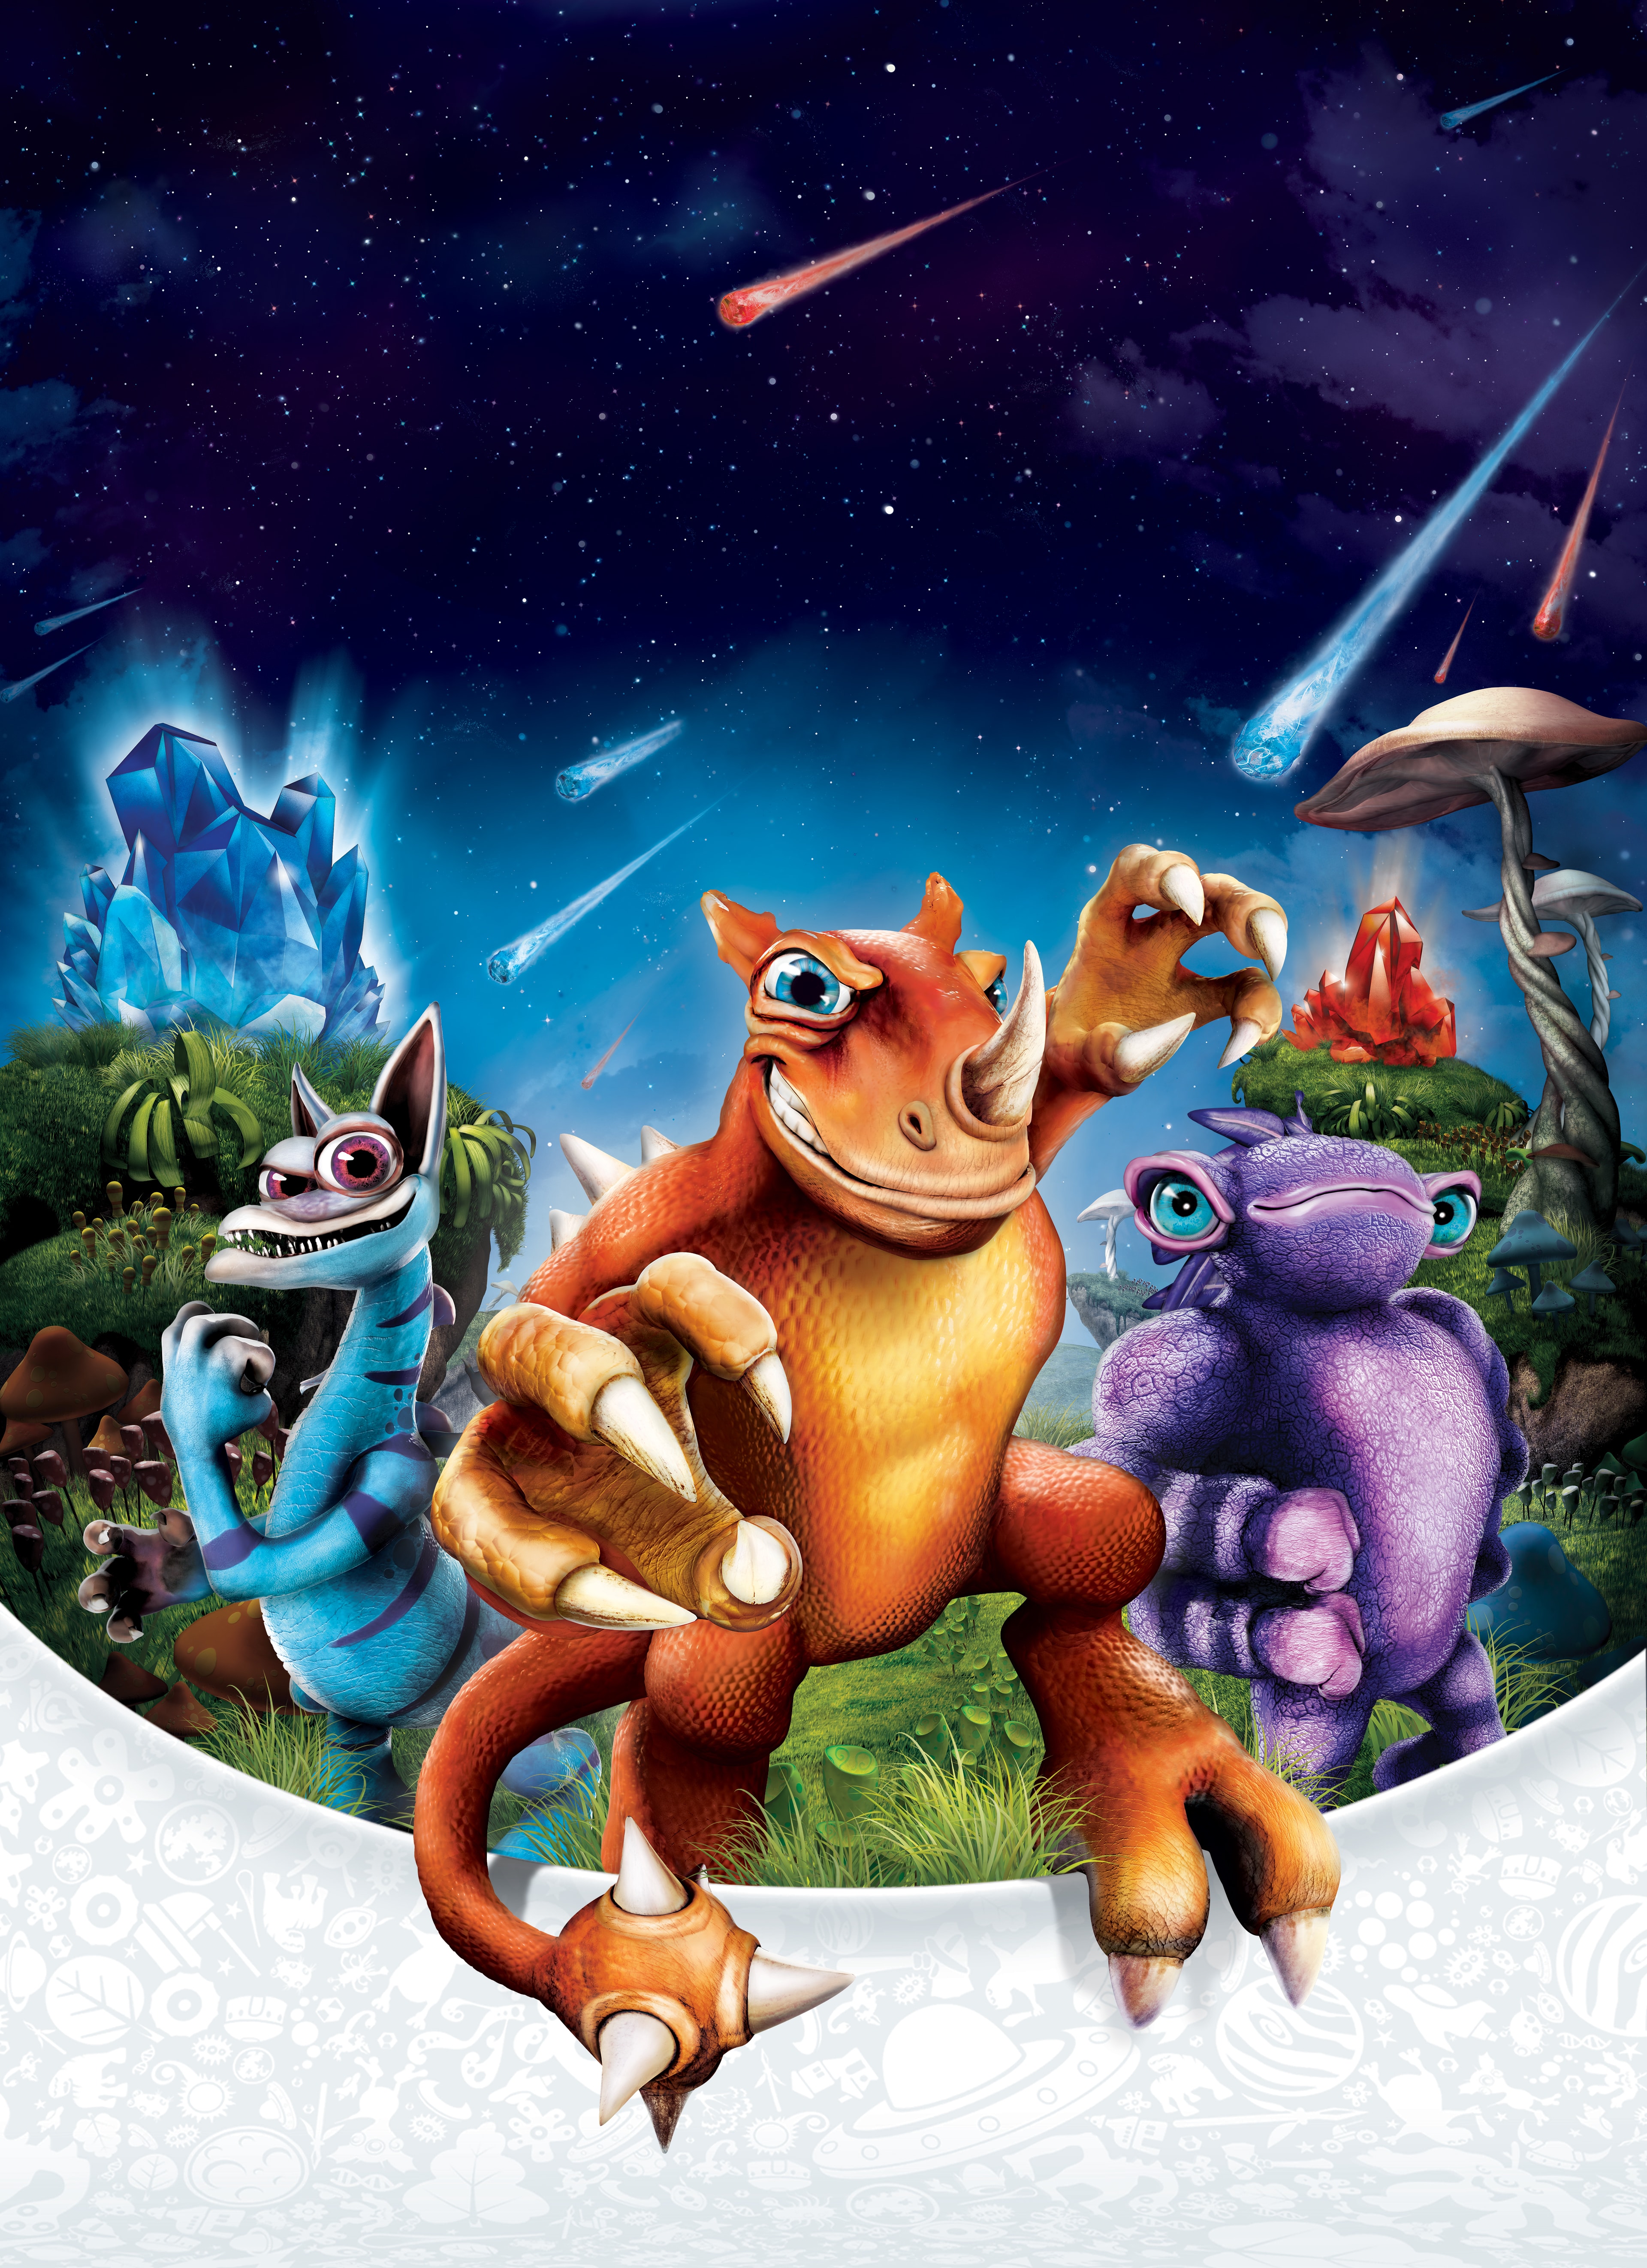 spore for free download pc